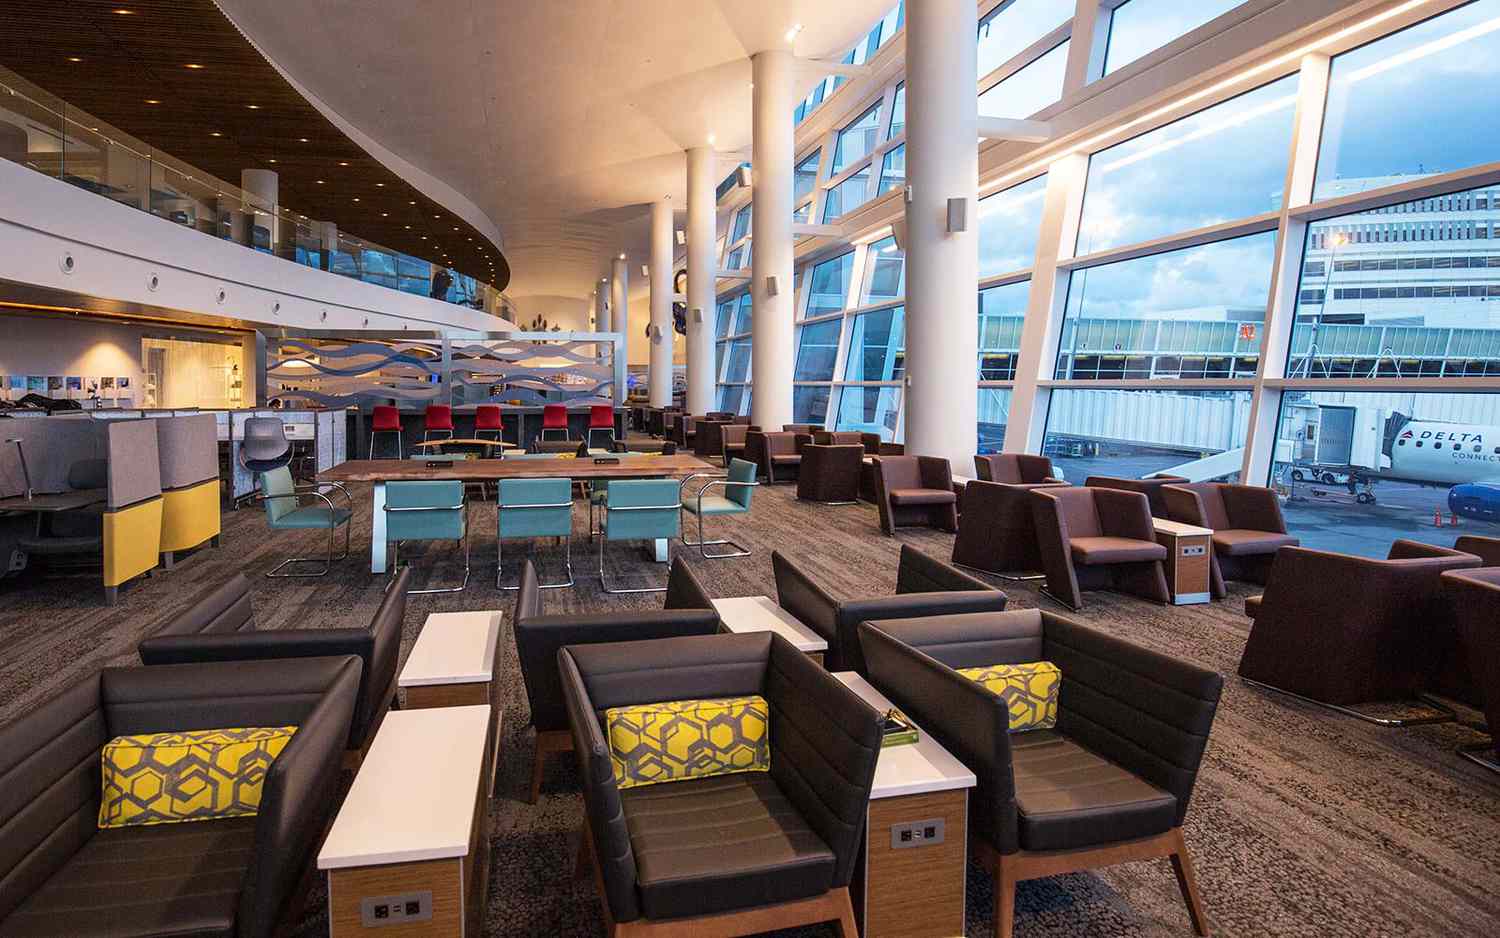 Delta Sky Club is the name of the lounge of Delta One. While the food at the lounge is excellent, it is hard to discover anything particularly noteworthy or exquisite. Besides, Delta Sky Club lounge spaces provide entertainment options for its upper-class patrons